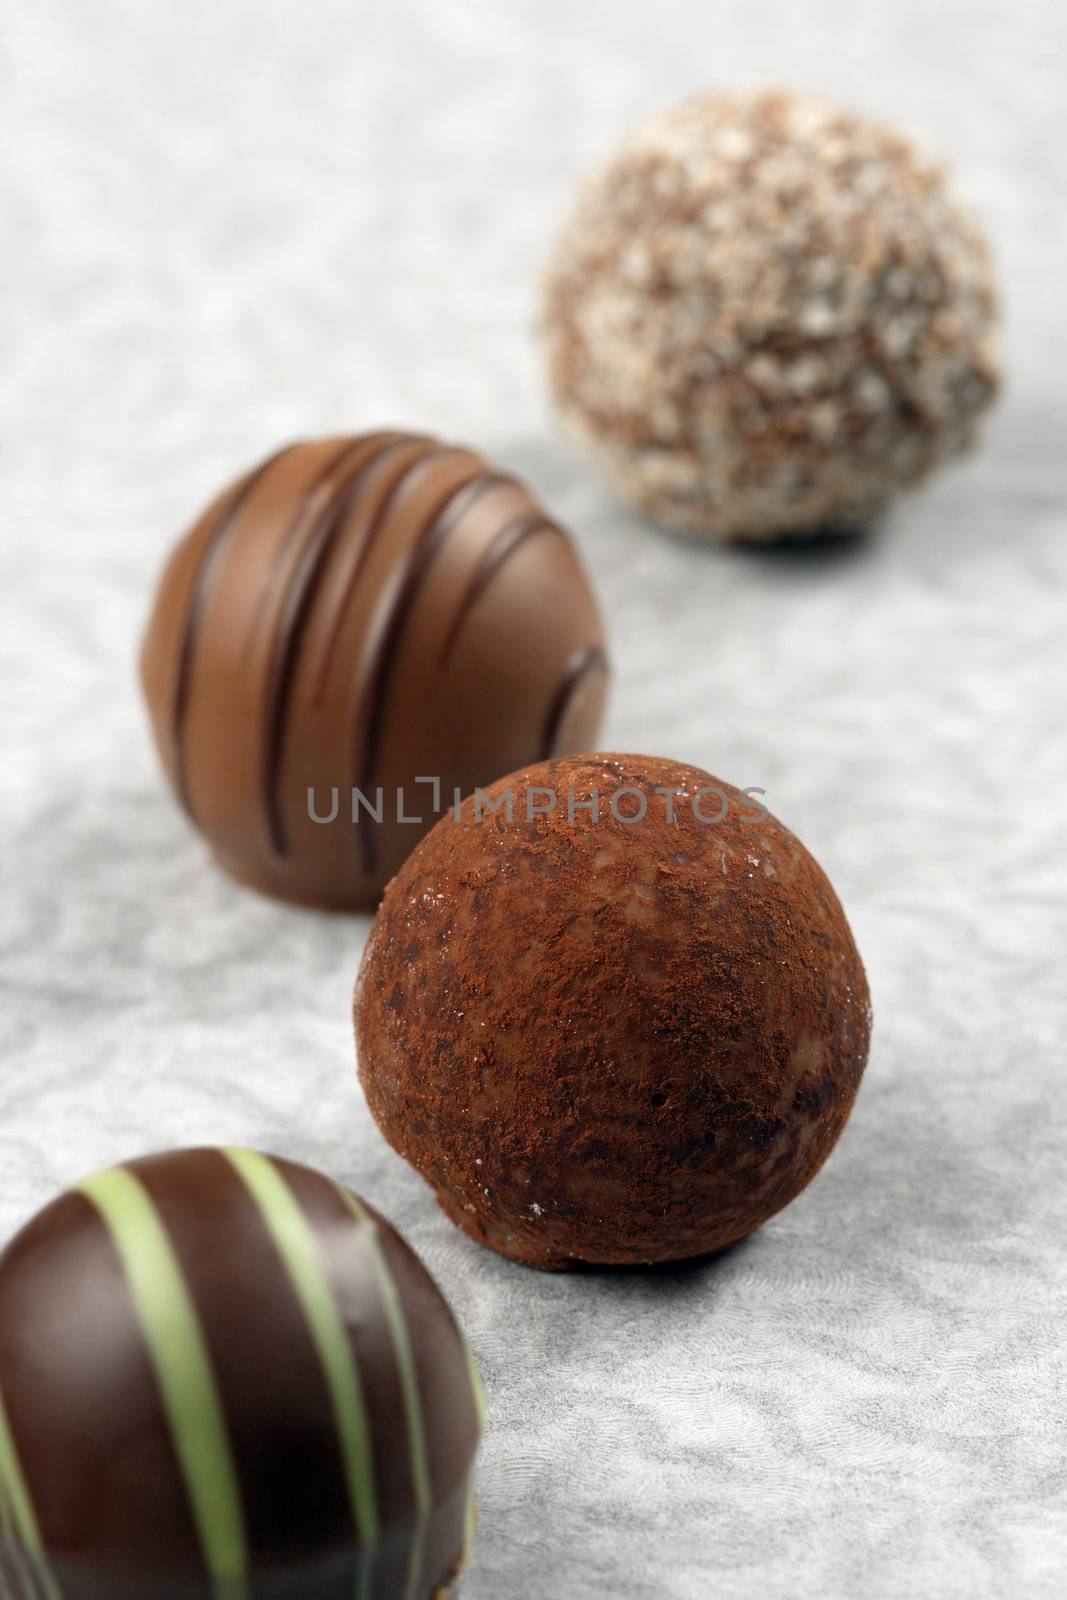 A small assortment of chocolate truffles and pralines on paper.  Very Shallow depth of field, focusing on middle truffle.
